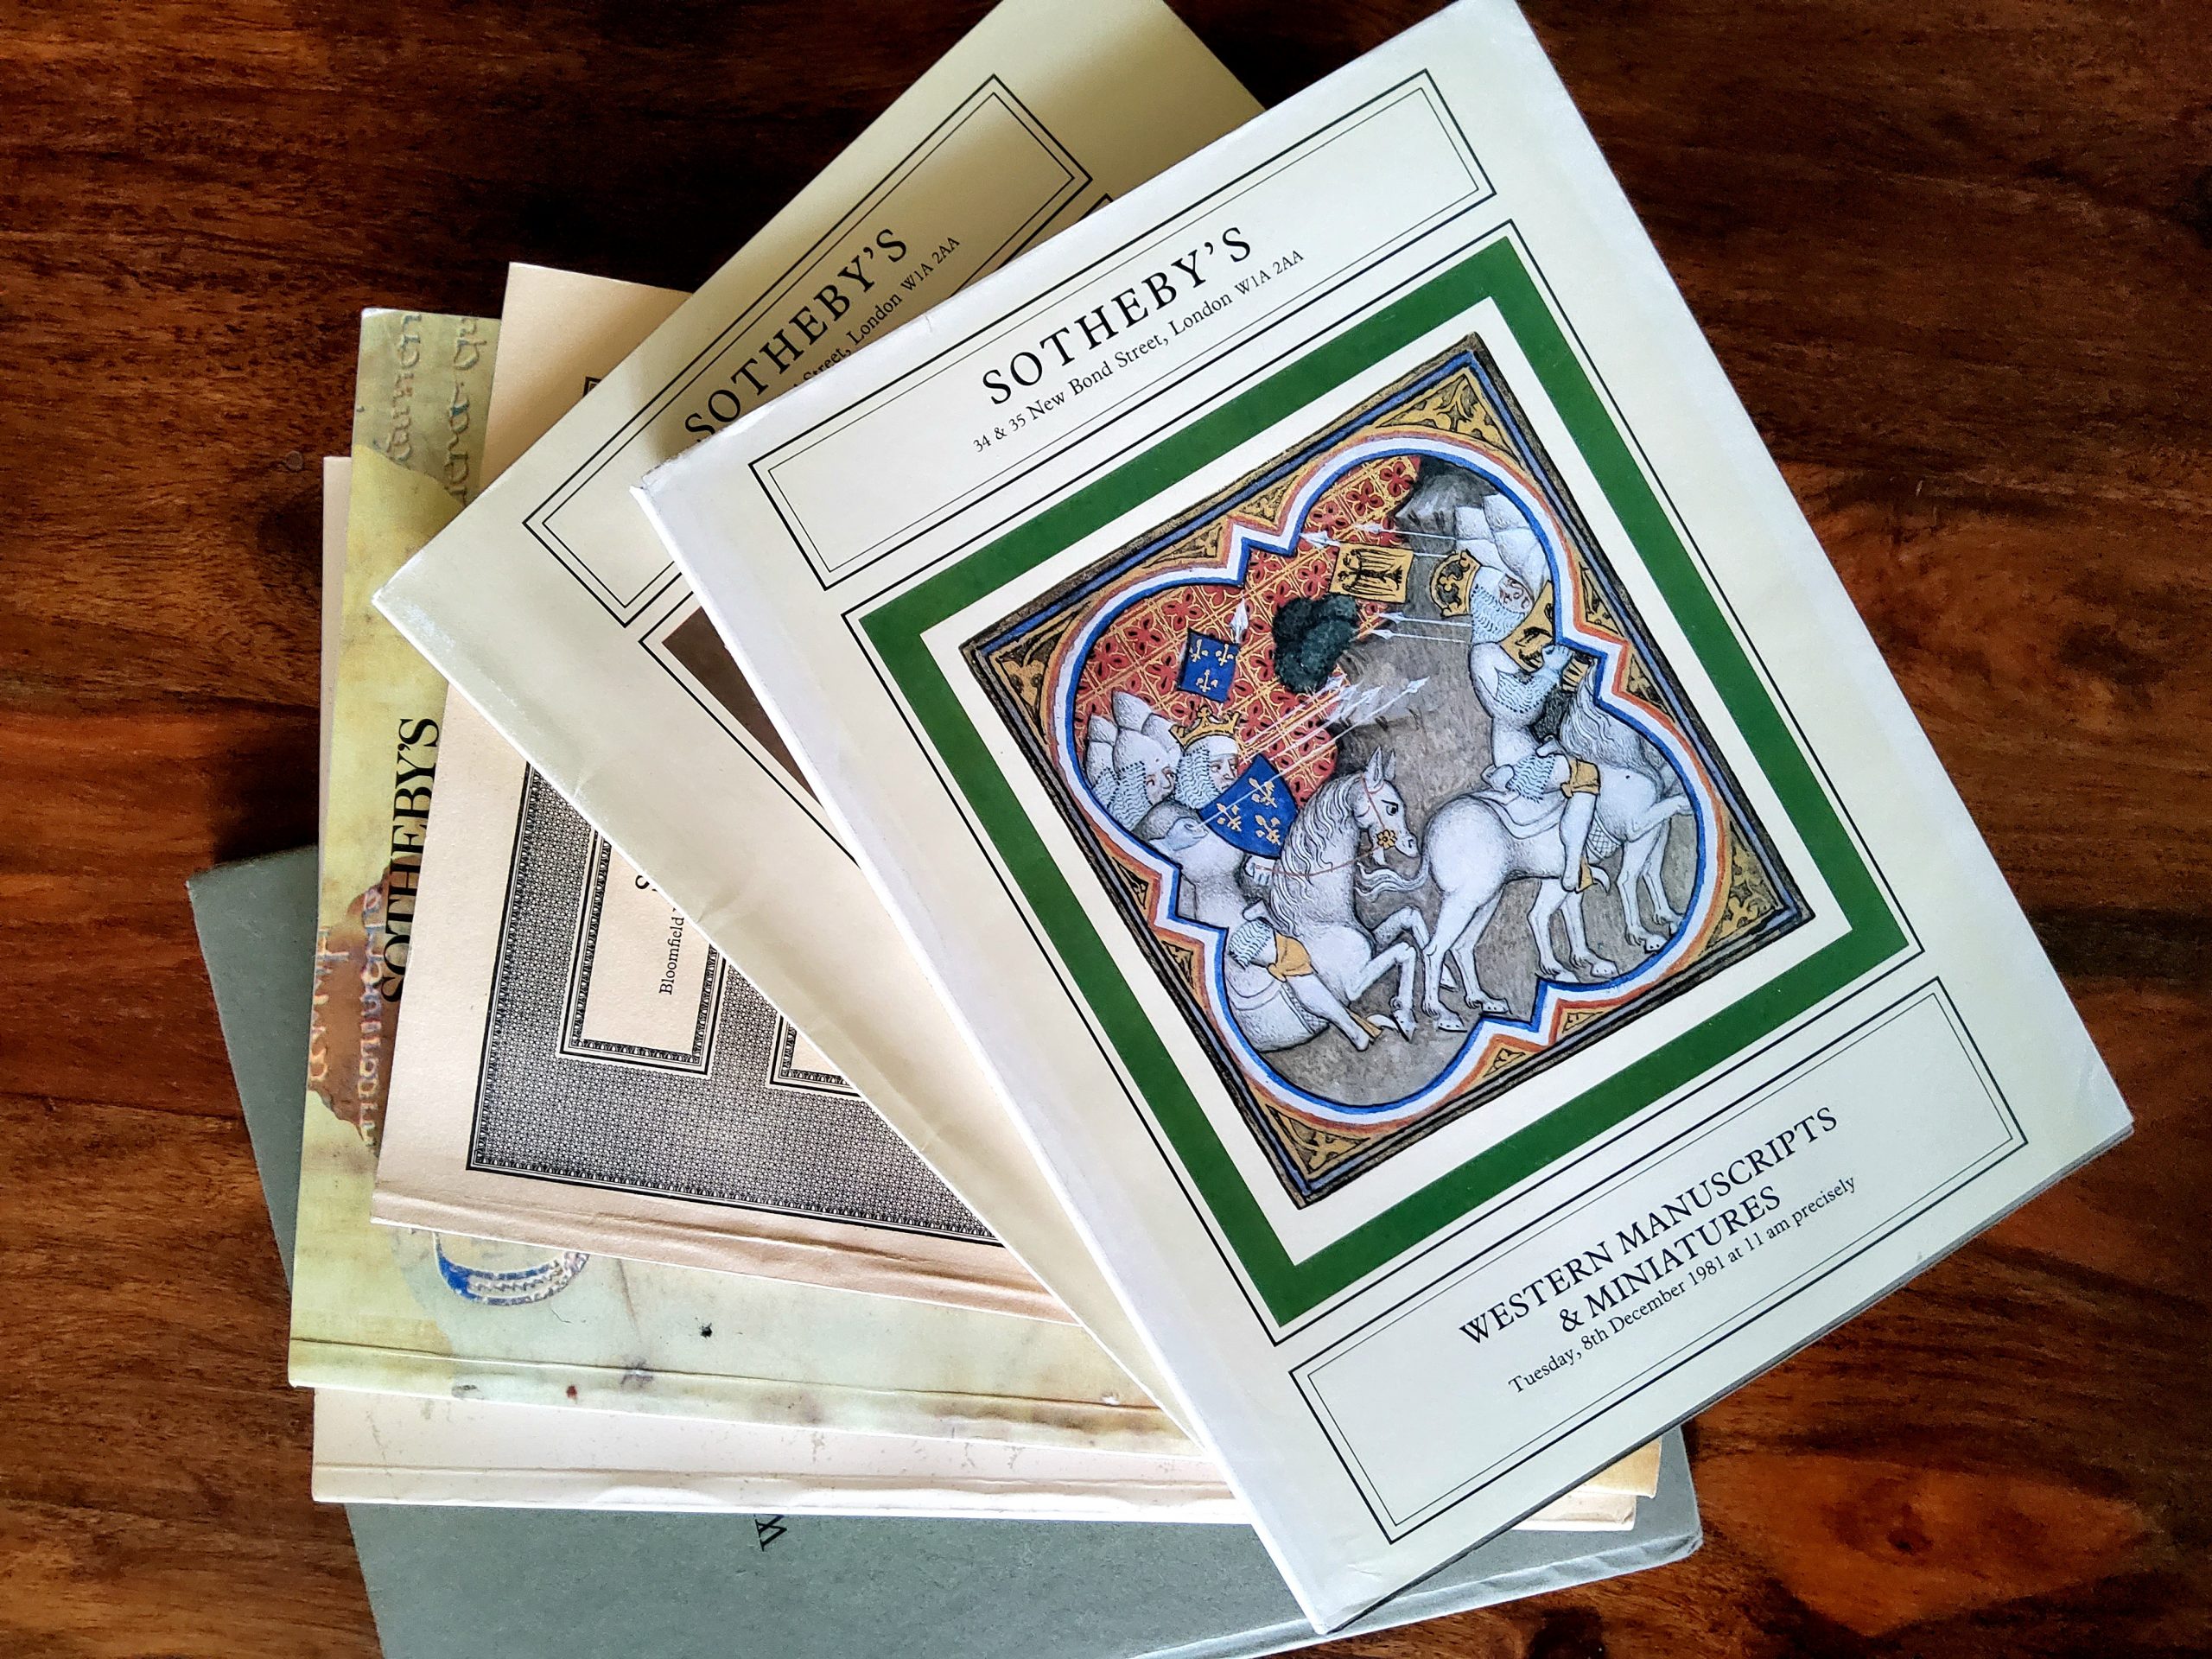 Sotheby’s Catalogues of Western Manuscripts and Miniatures. 6 volumes. 1981-1987